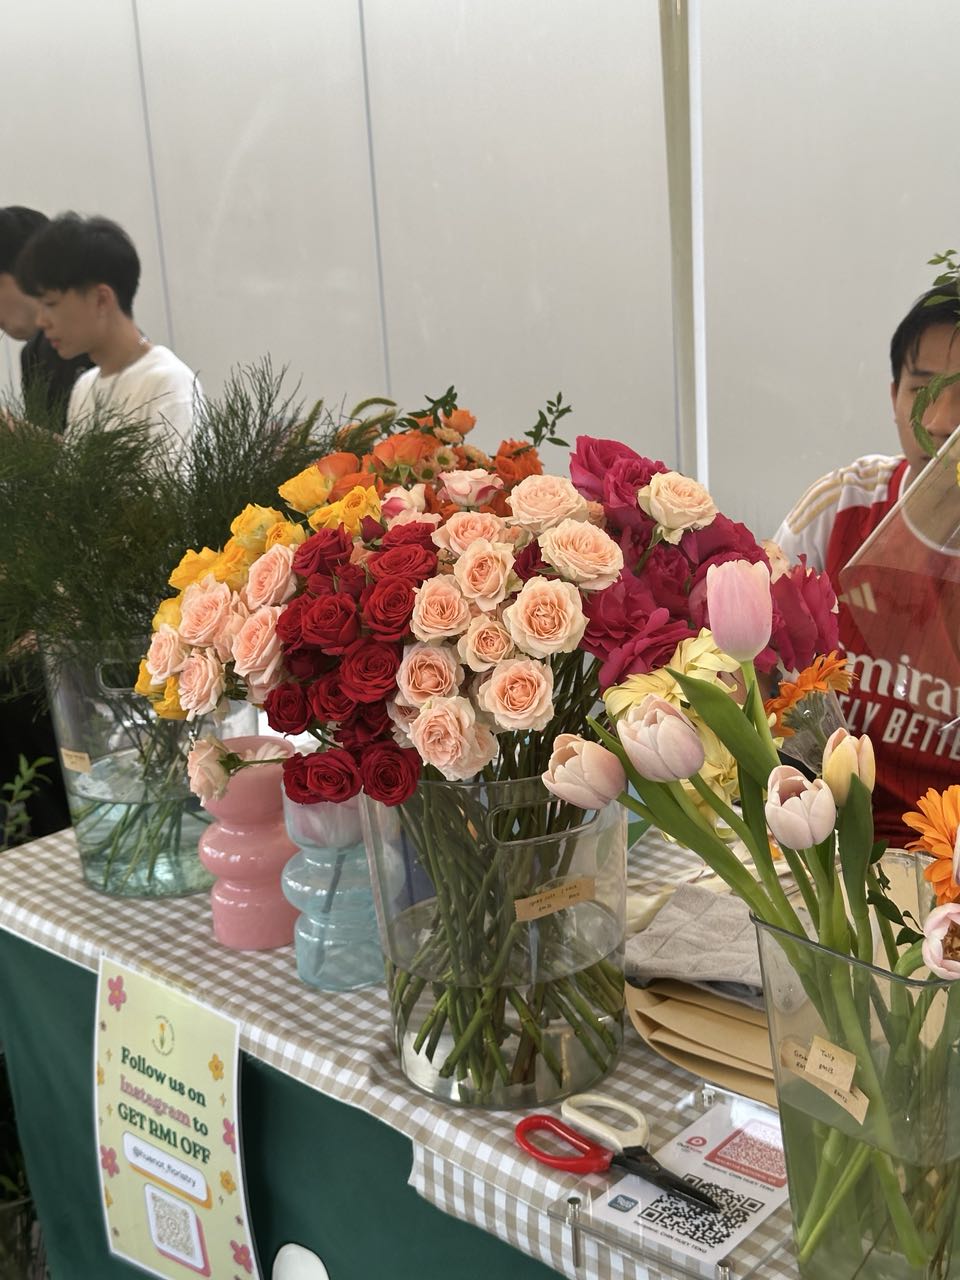 Flower bouquet sold in a booth